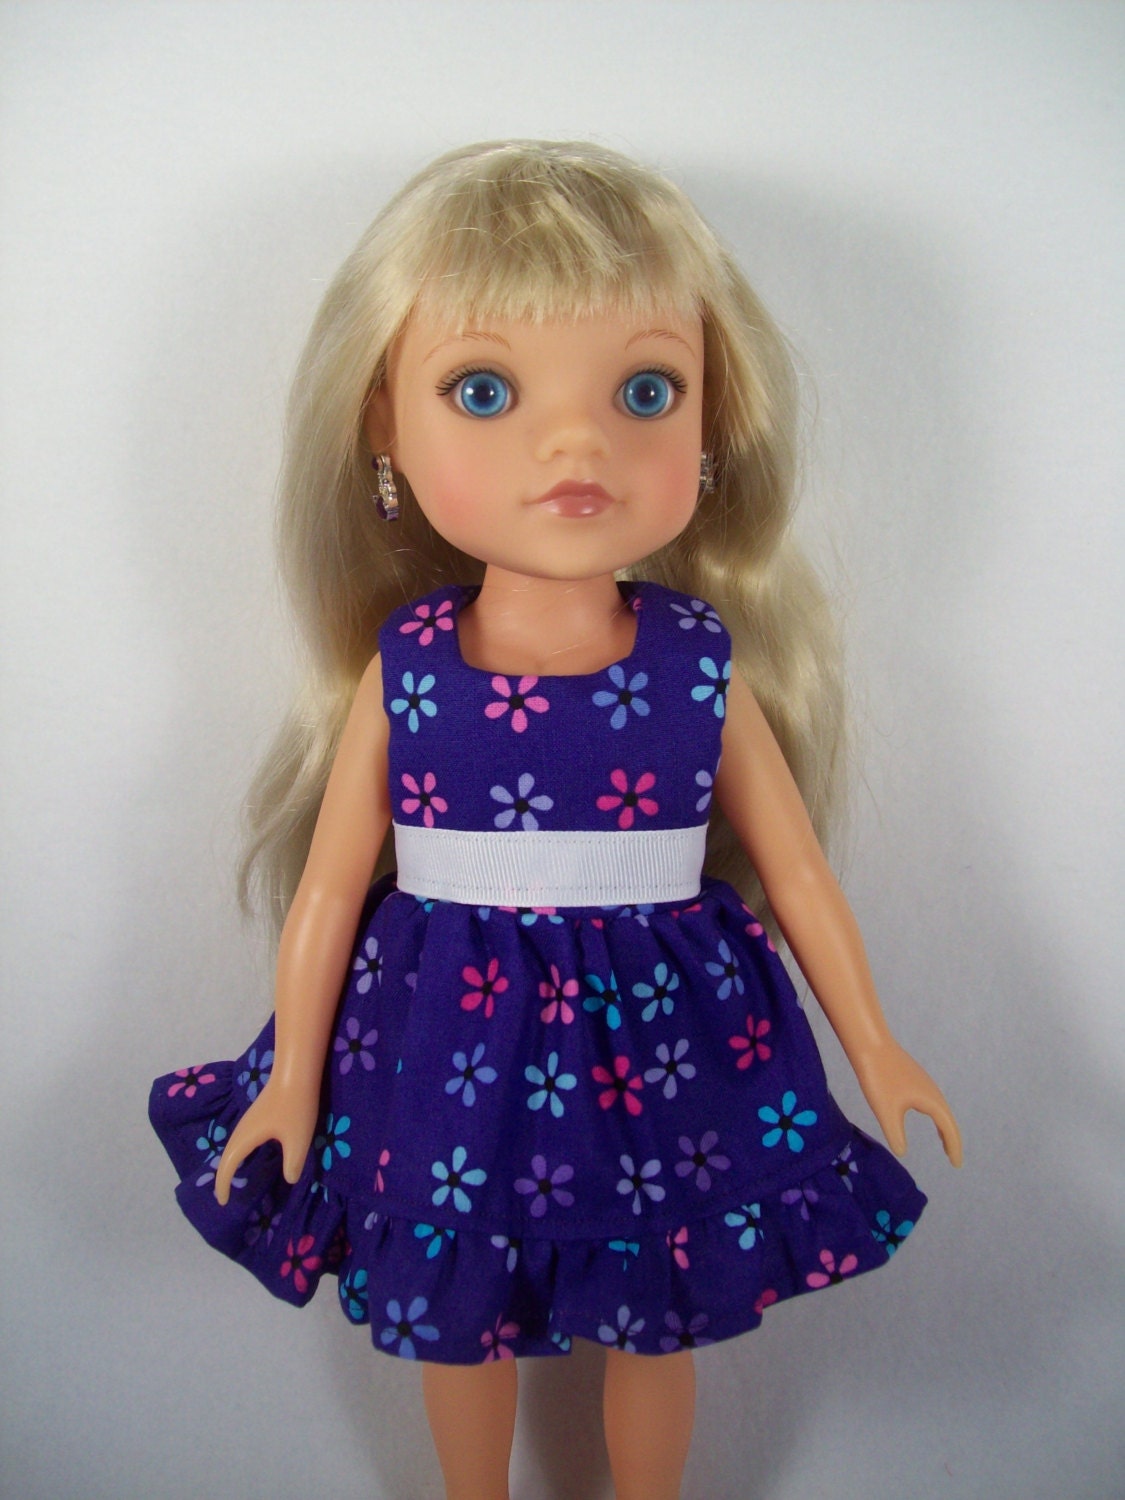 Heart for Heart Doll Clothes Purple Dress with Multi-Colored